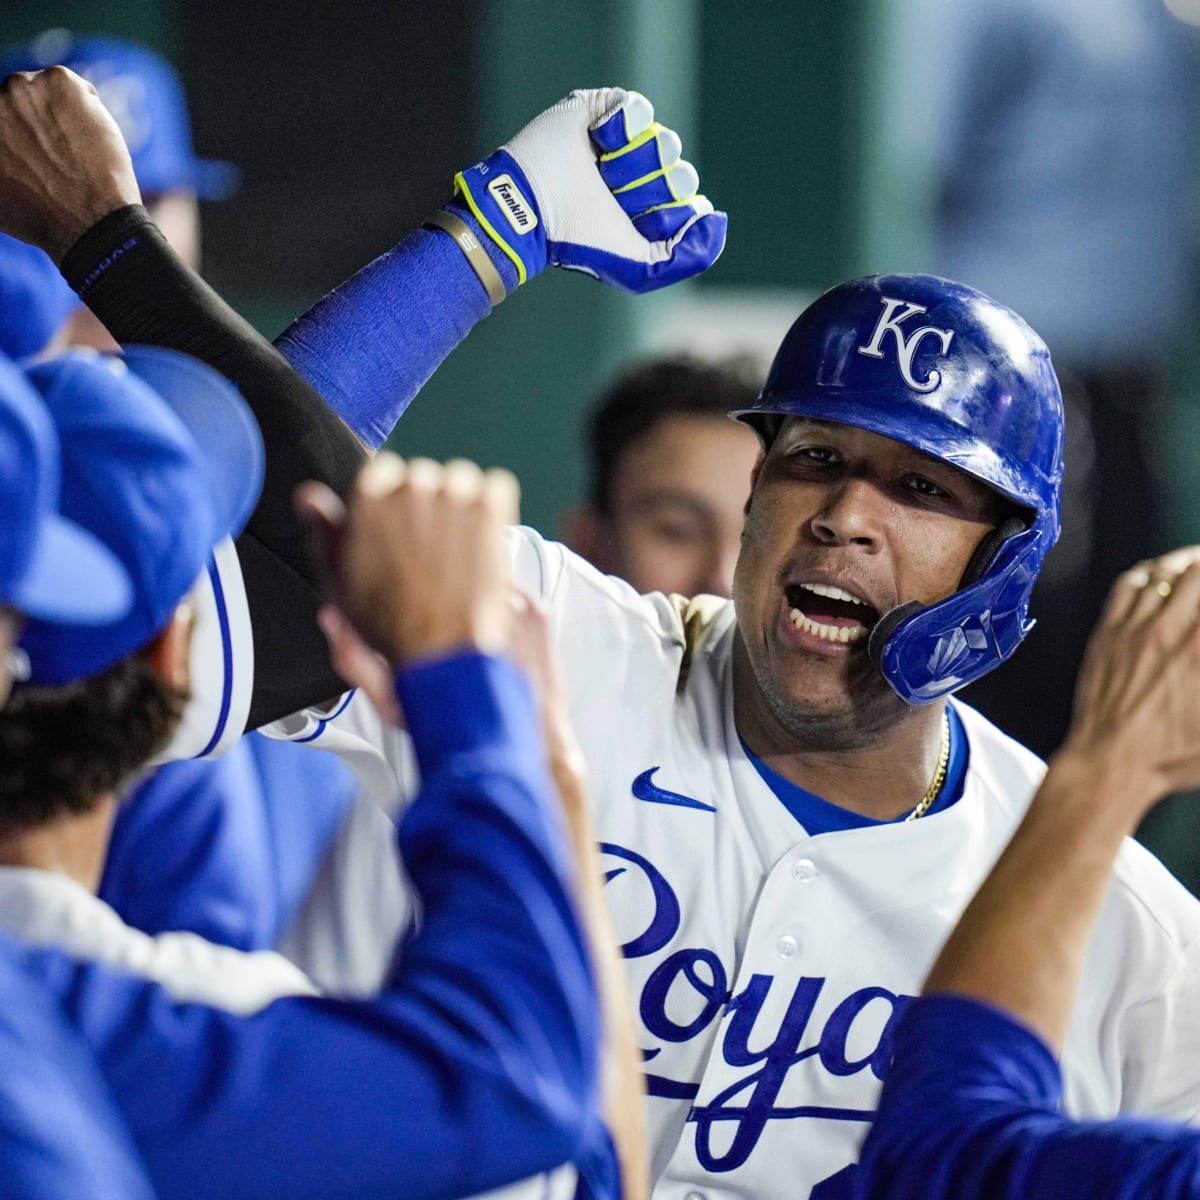 Royals catcher Salvador Perez wins third Silver Slugger Award  News,  Sports, Jobs - Lawrence Journal-World: news, information, headlines and  events in Lawrence, Kansas